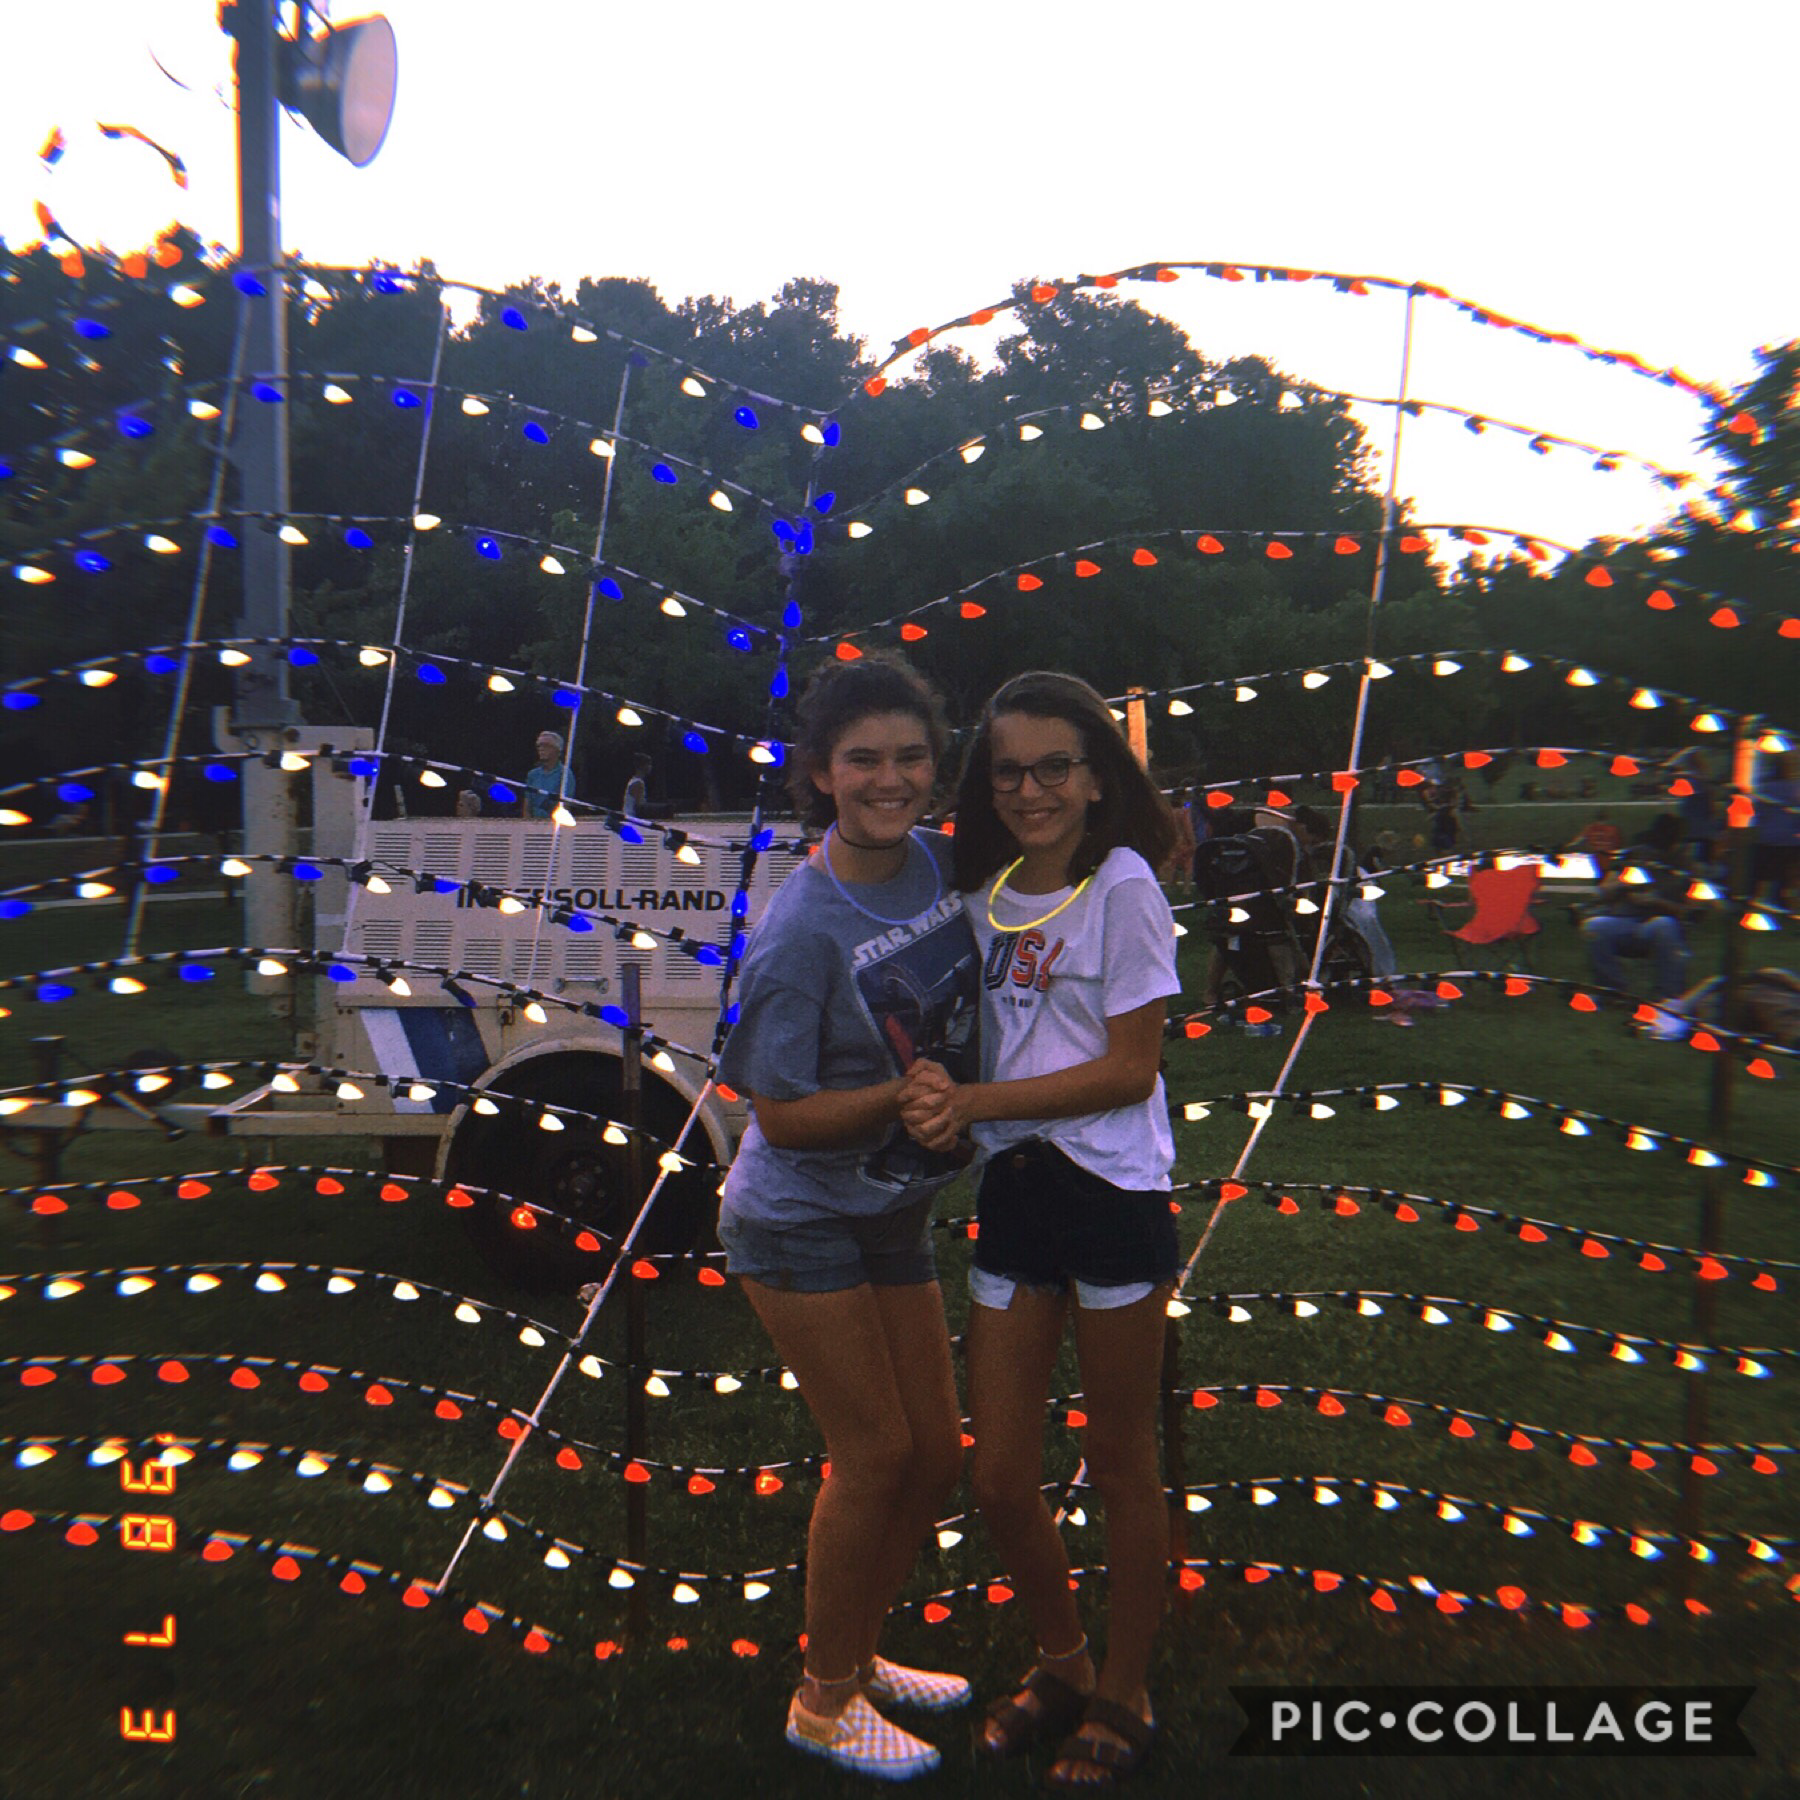 Had so much fun celebrating our independence with her!!! I cracked my phone so that sucks but oh well😅😅